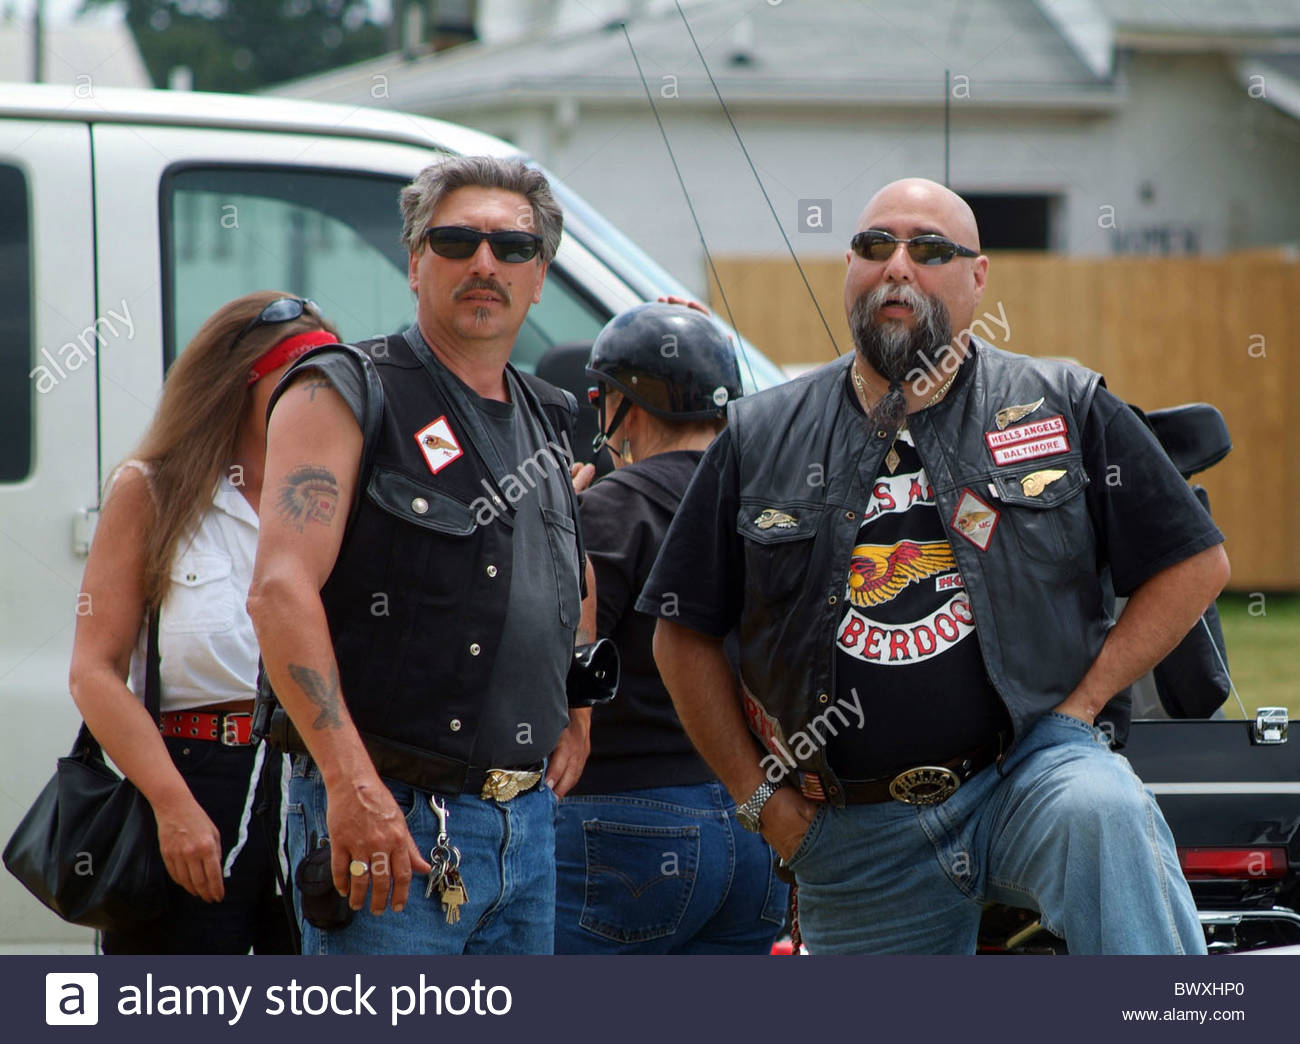 Filipino Gangs and Fraternities: Hells Angels Motorcycle Club MC or ...